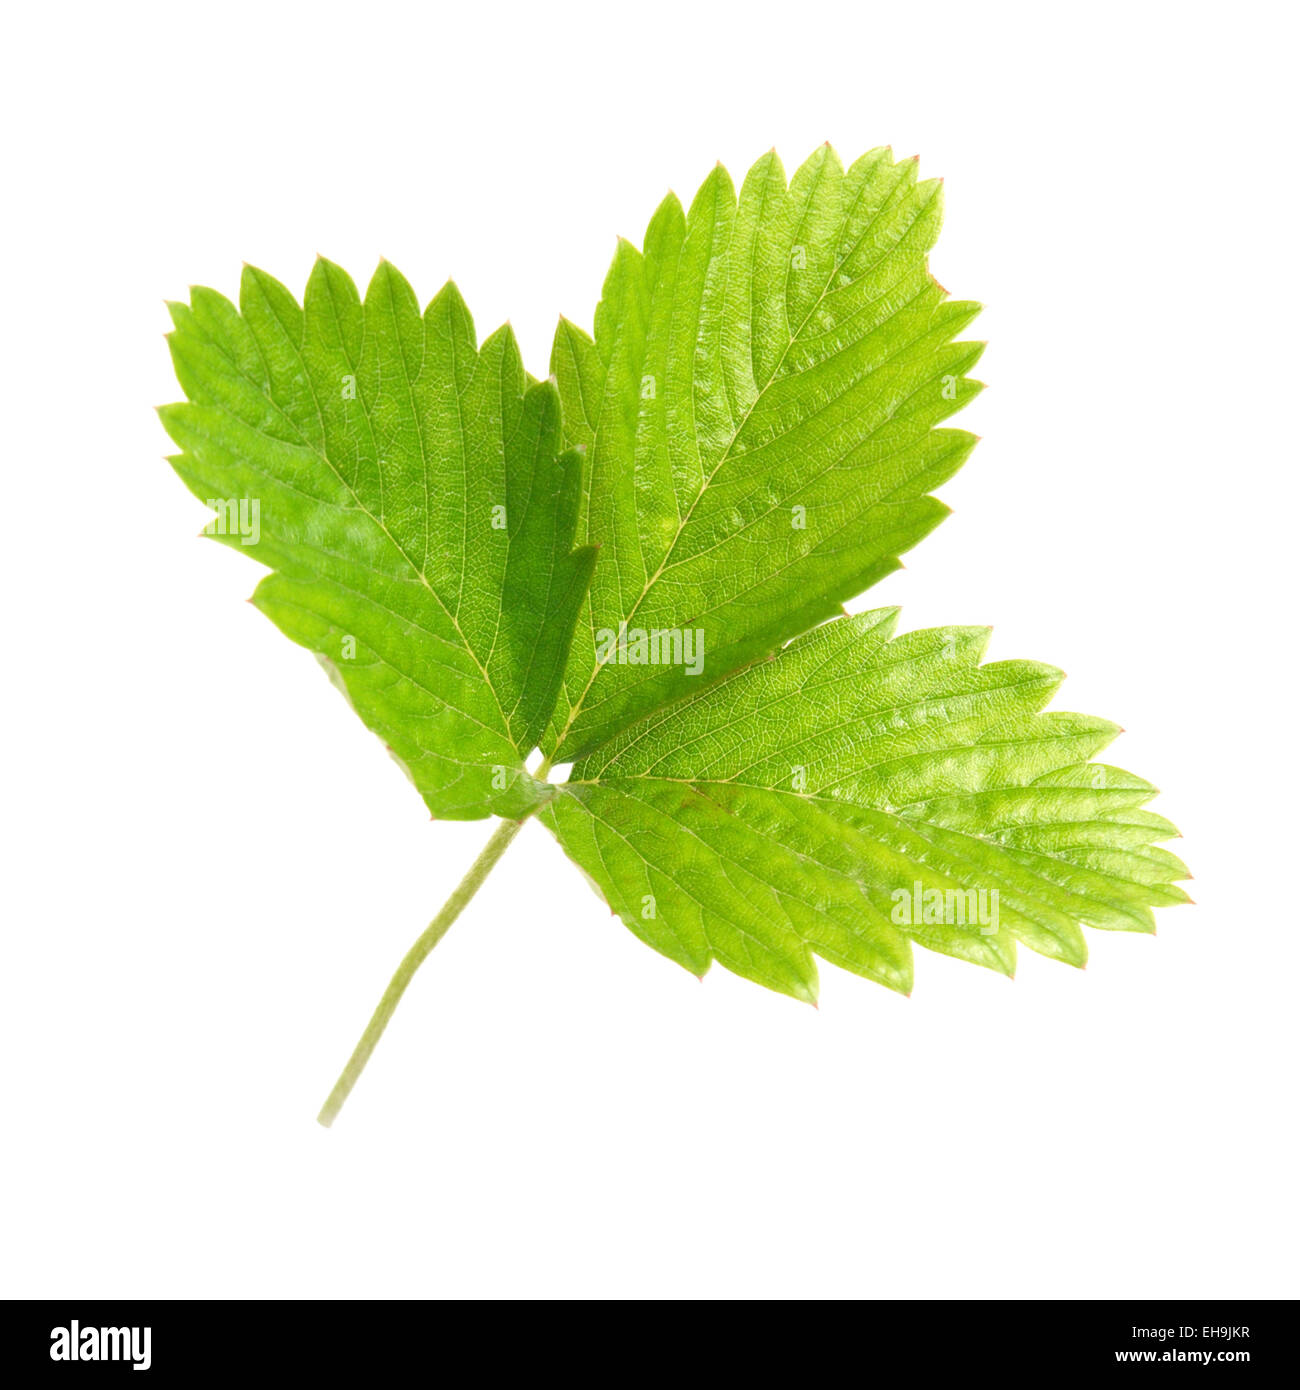 Strawberry's green leaf isolated on white background Stock Photo